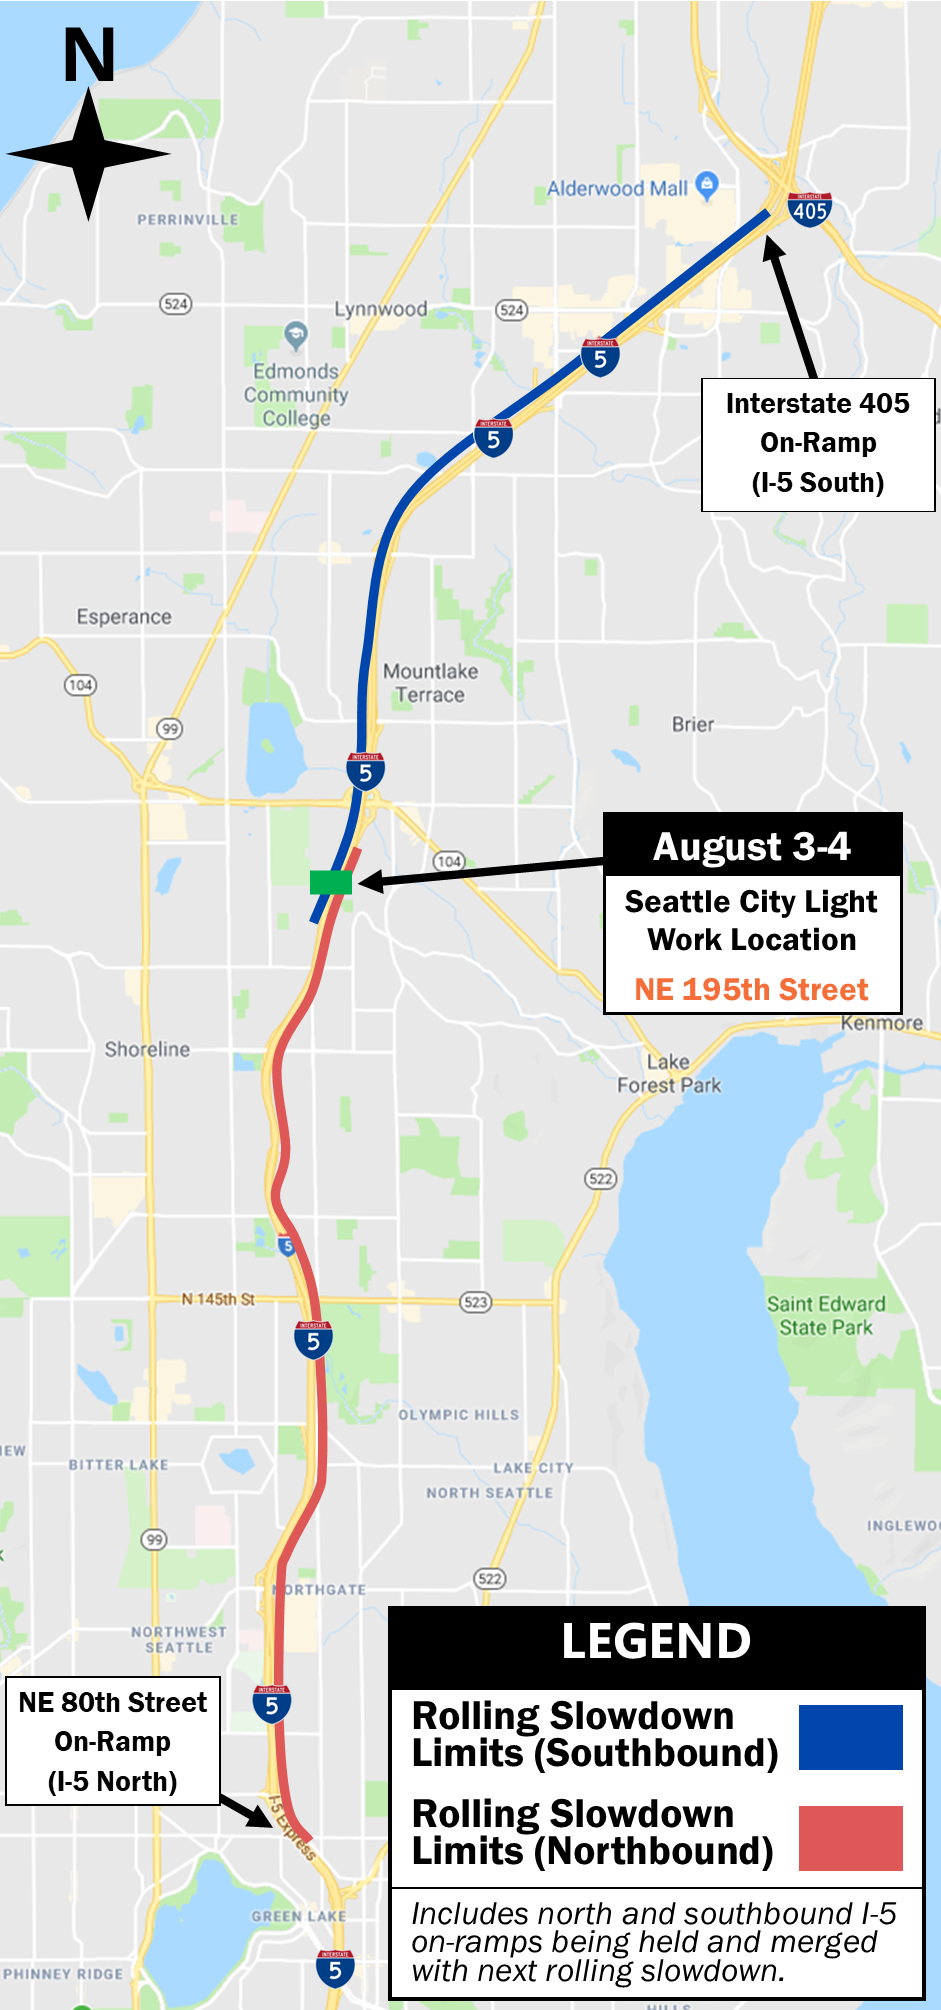 Limits of rolling slowdowns on I-5 from Aug. 3-4